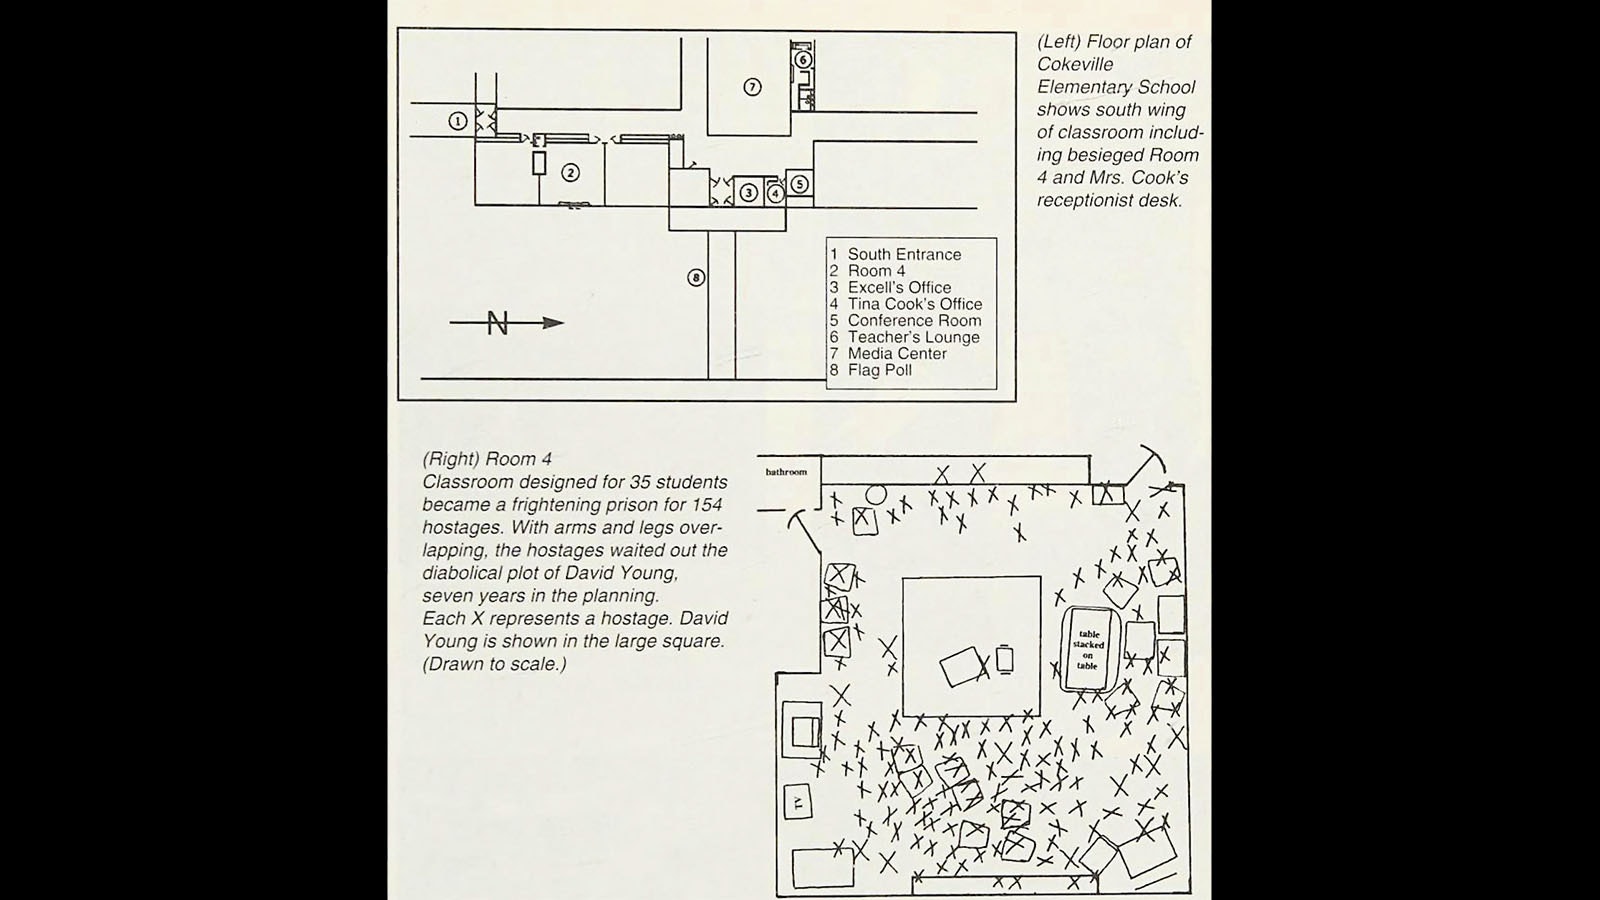 This diagram of the school and Room 4 in Cokeville Elementary shows how 154 hostages were crammed into a classroom designed for 35 students. The bomber, David Young, is represented by the X in the large square in the middle of the room.